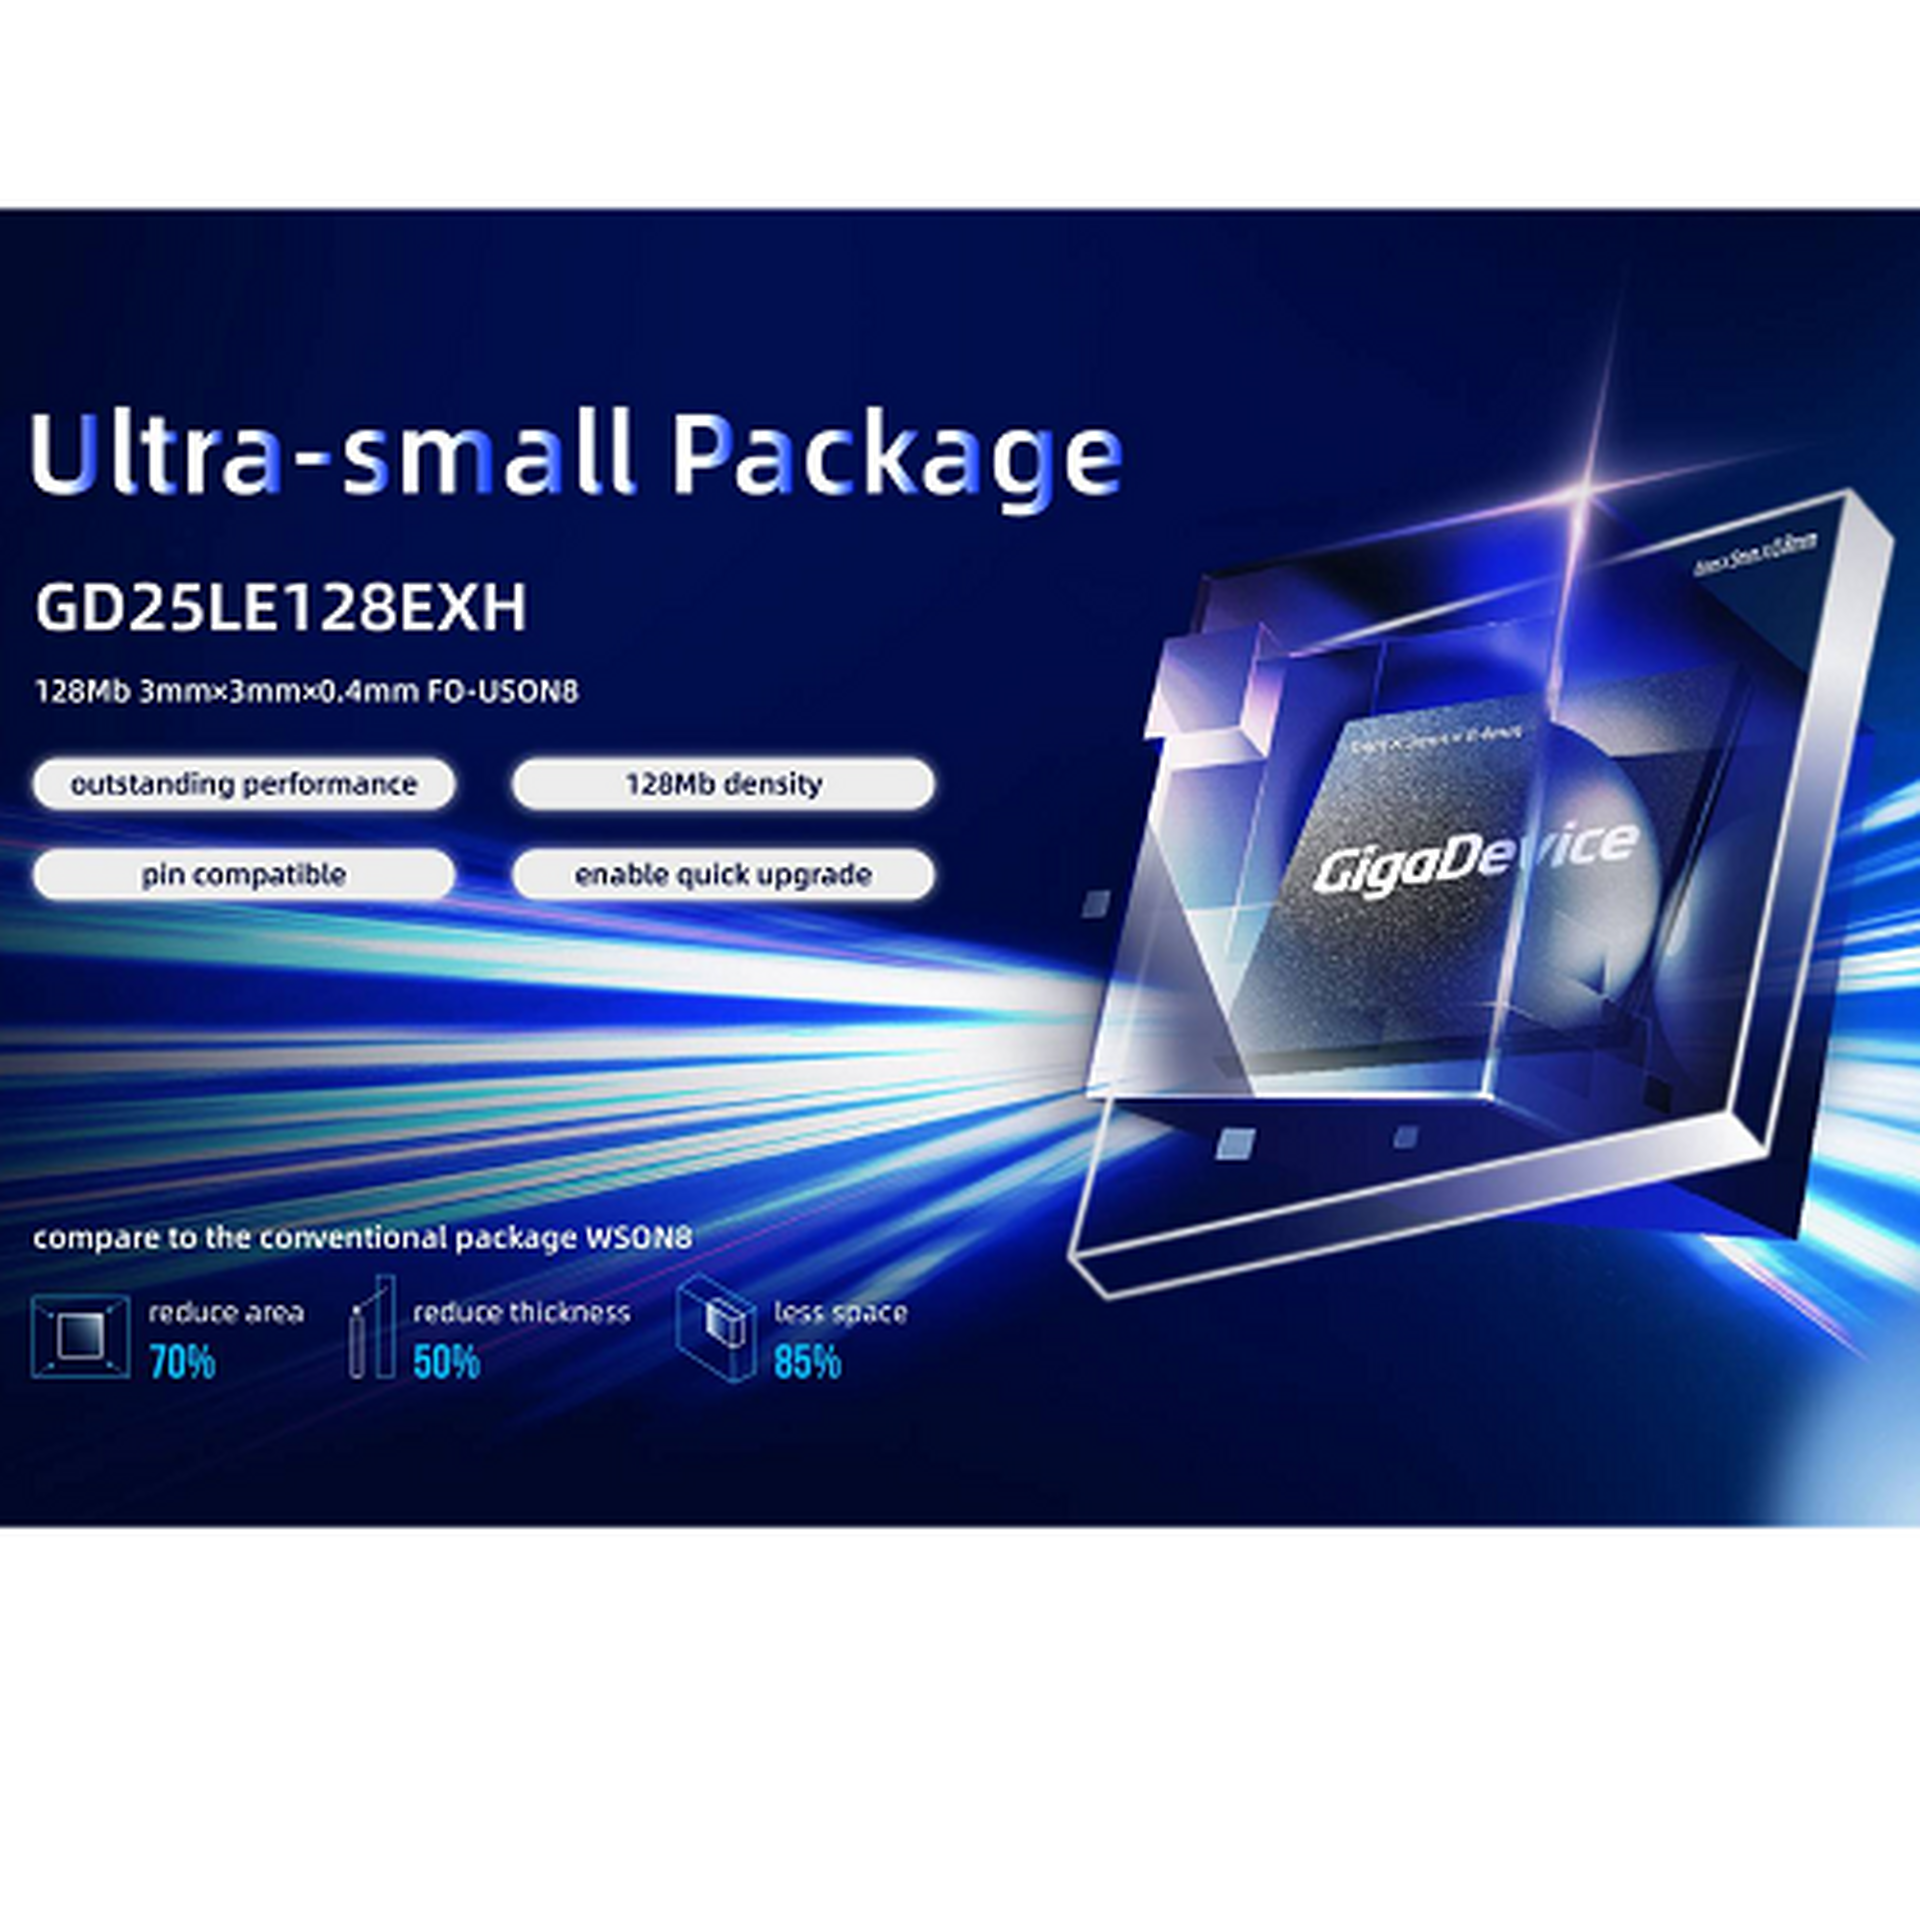 Giga Device GD25 LE128 EXH ultra small package